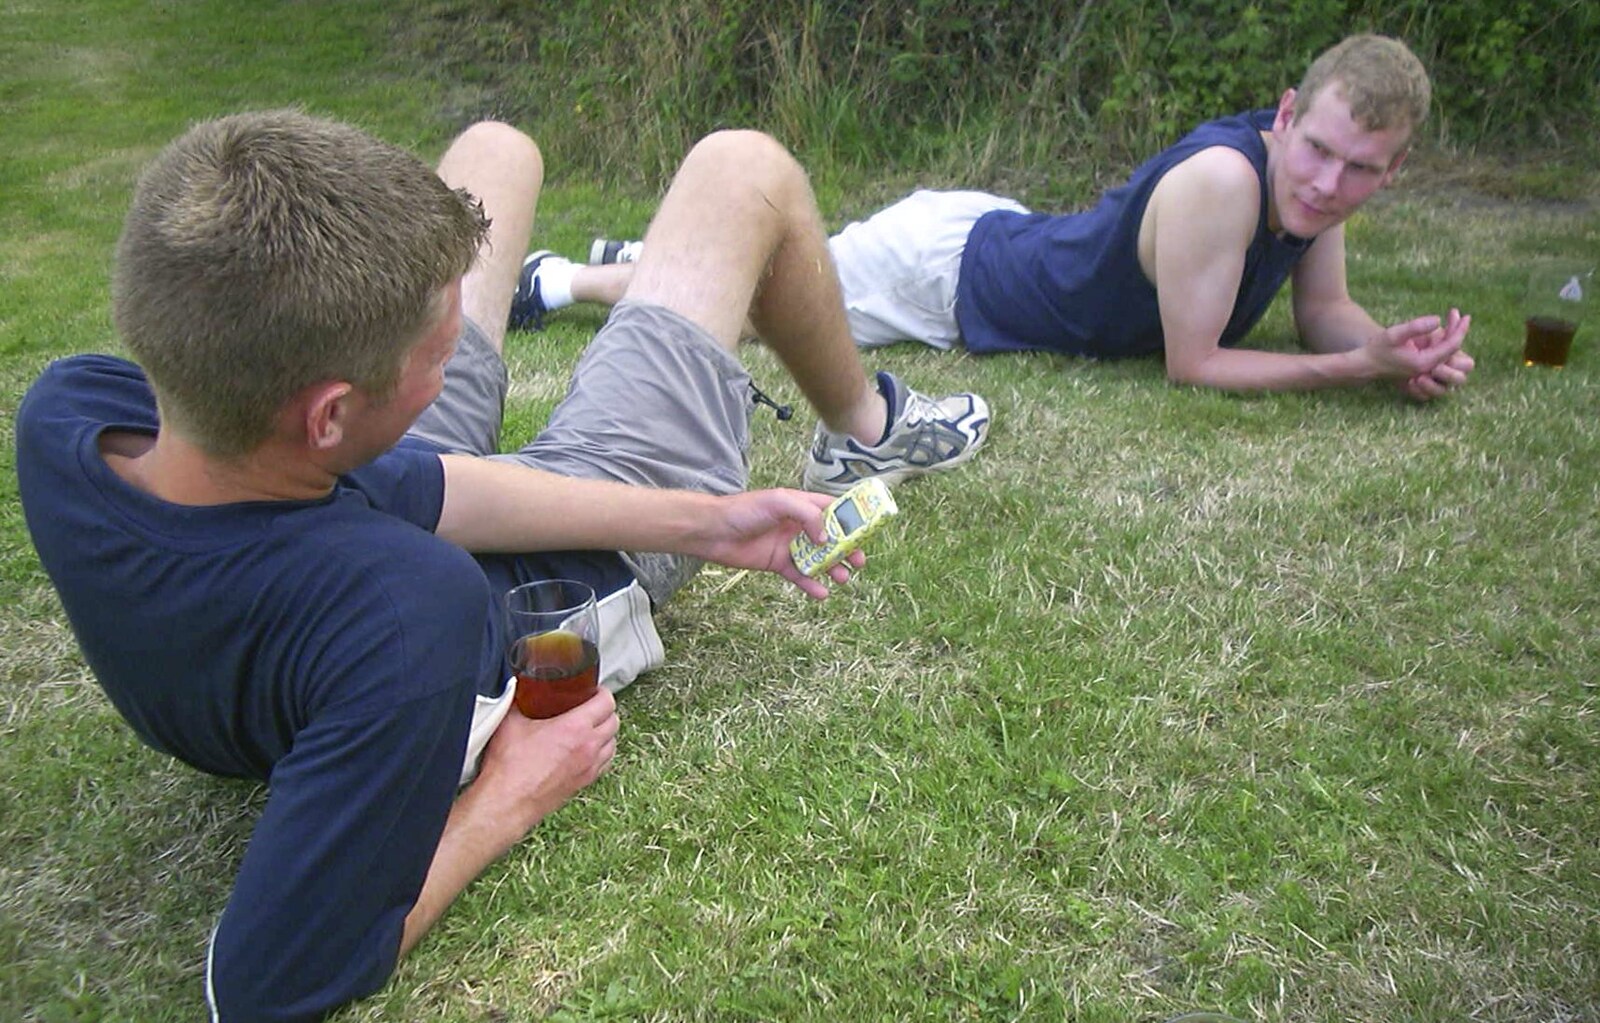 The Boy Phil on his Nokia from A BSCC Camping Trip to the Fox Inn, Shadingfield, Suffolk - 9th August 2003